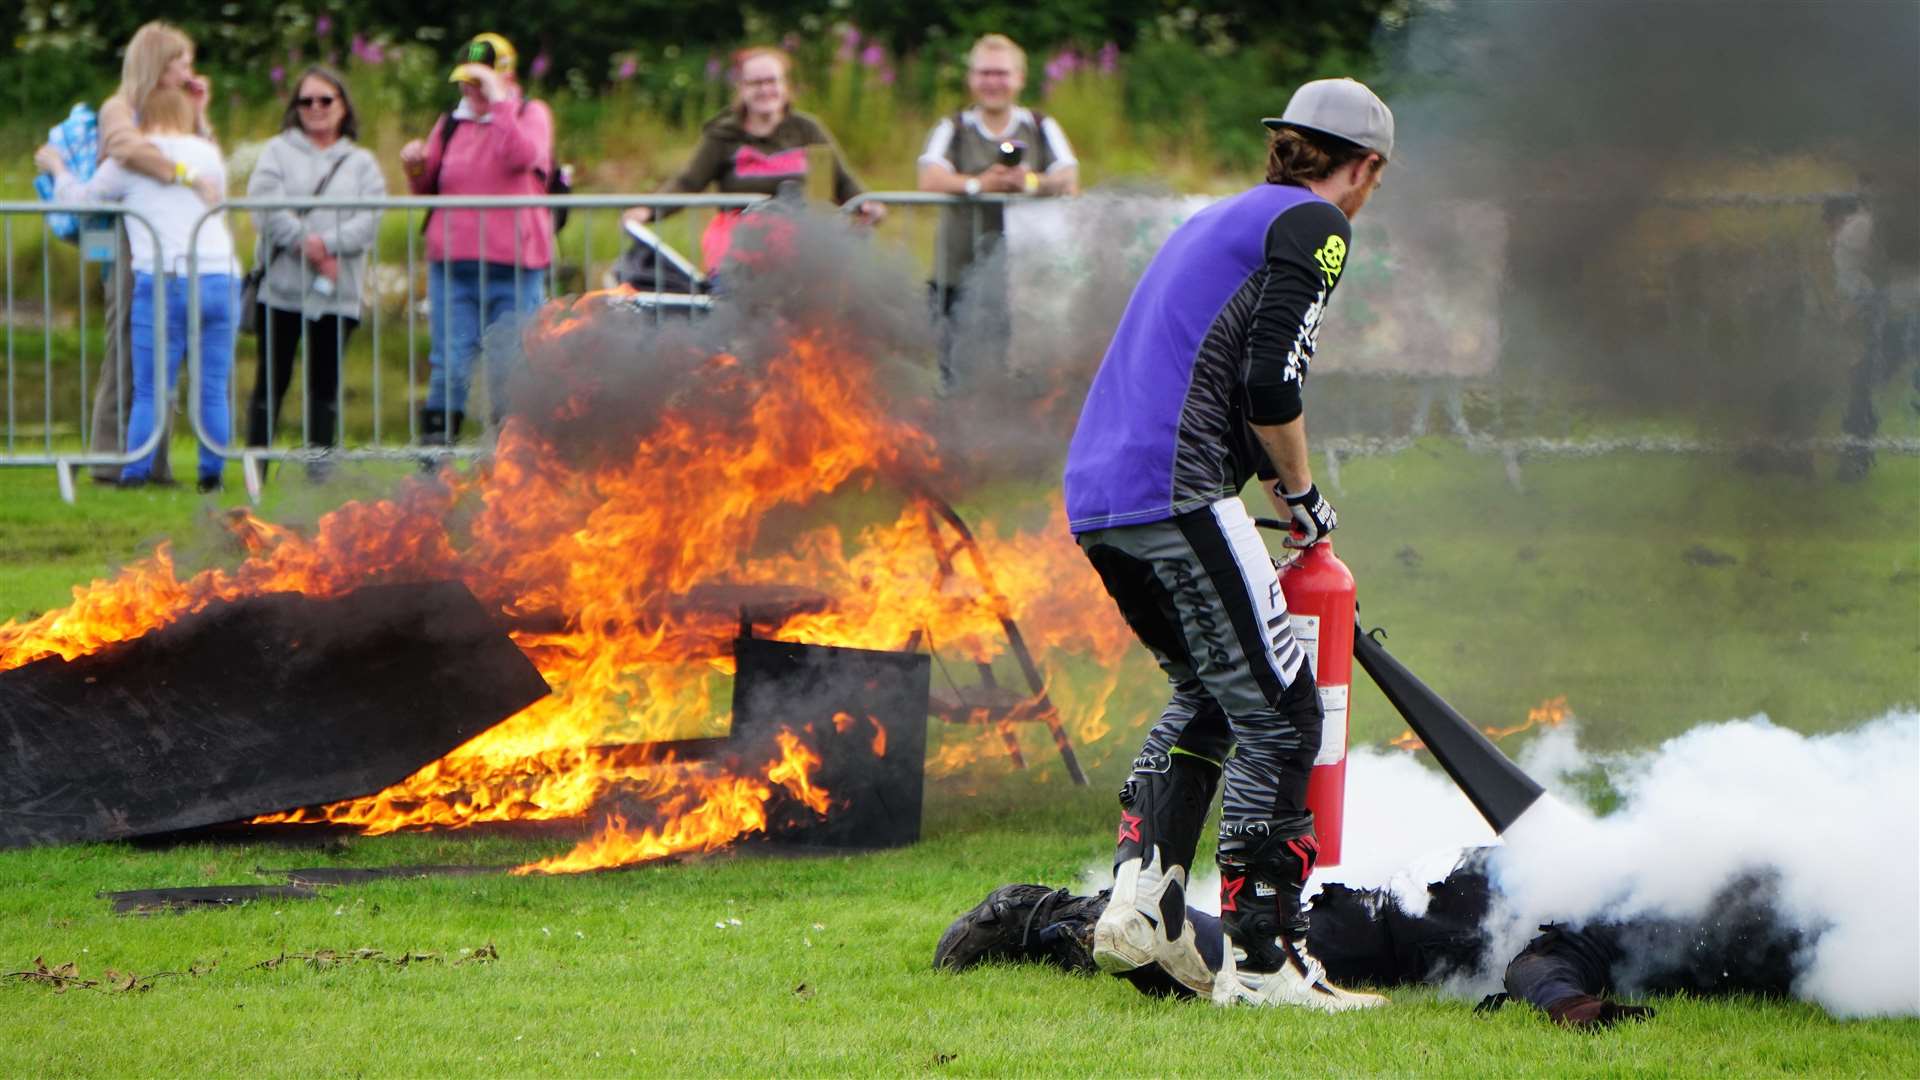 The Stannage Stunt Team's 'exploding coffin' act had the crowd enthralled. Picture: DGS